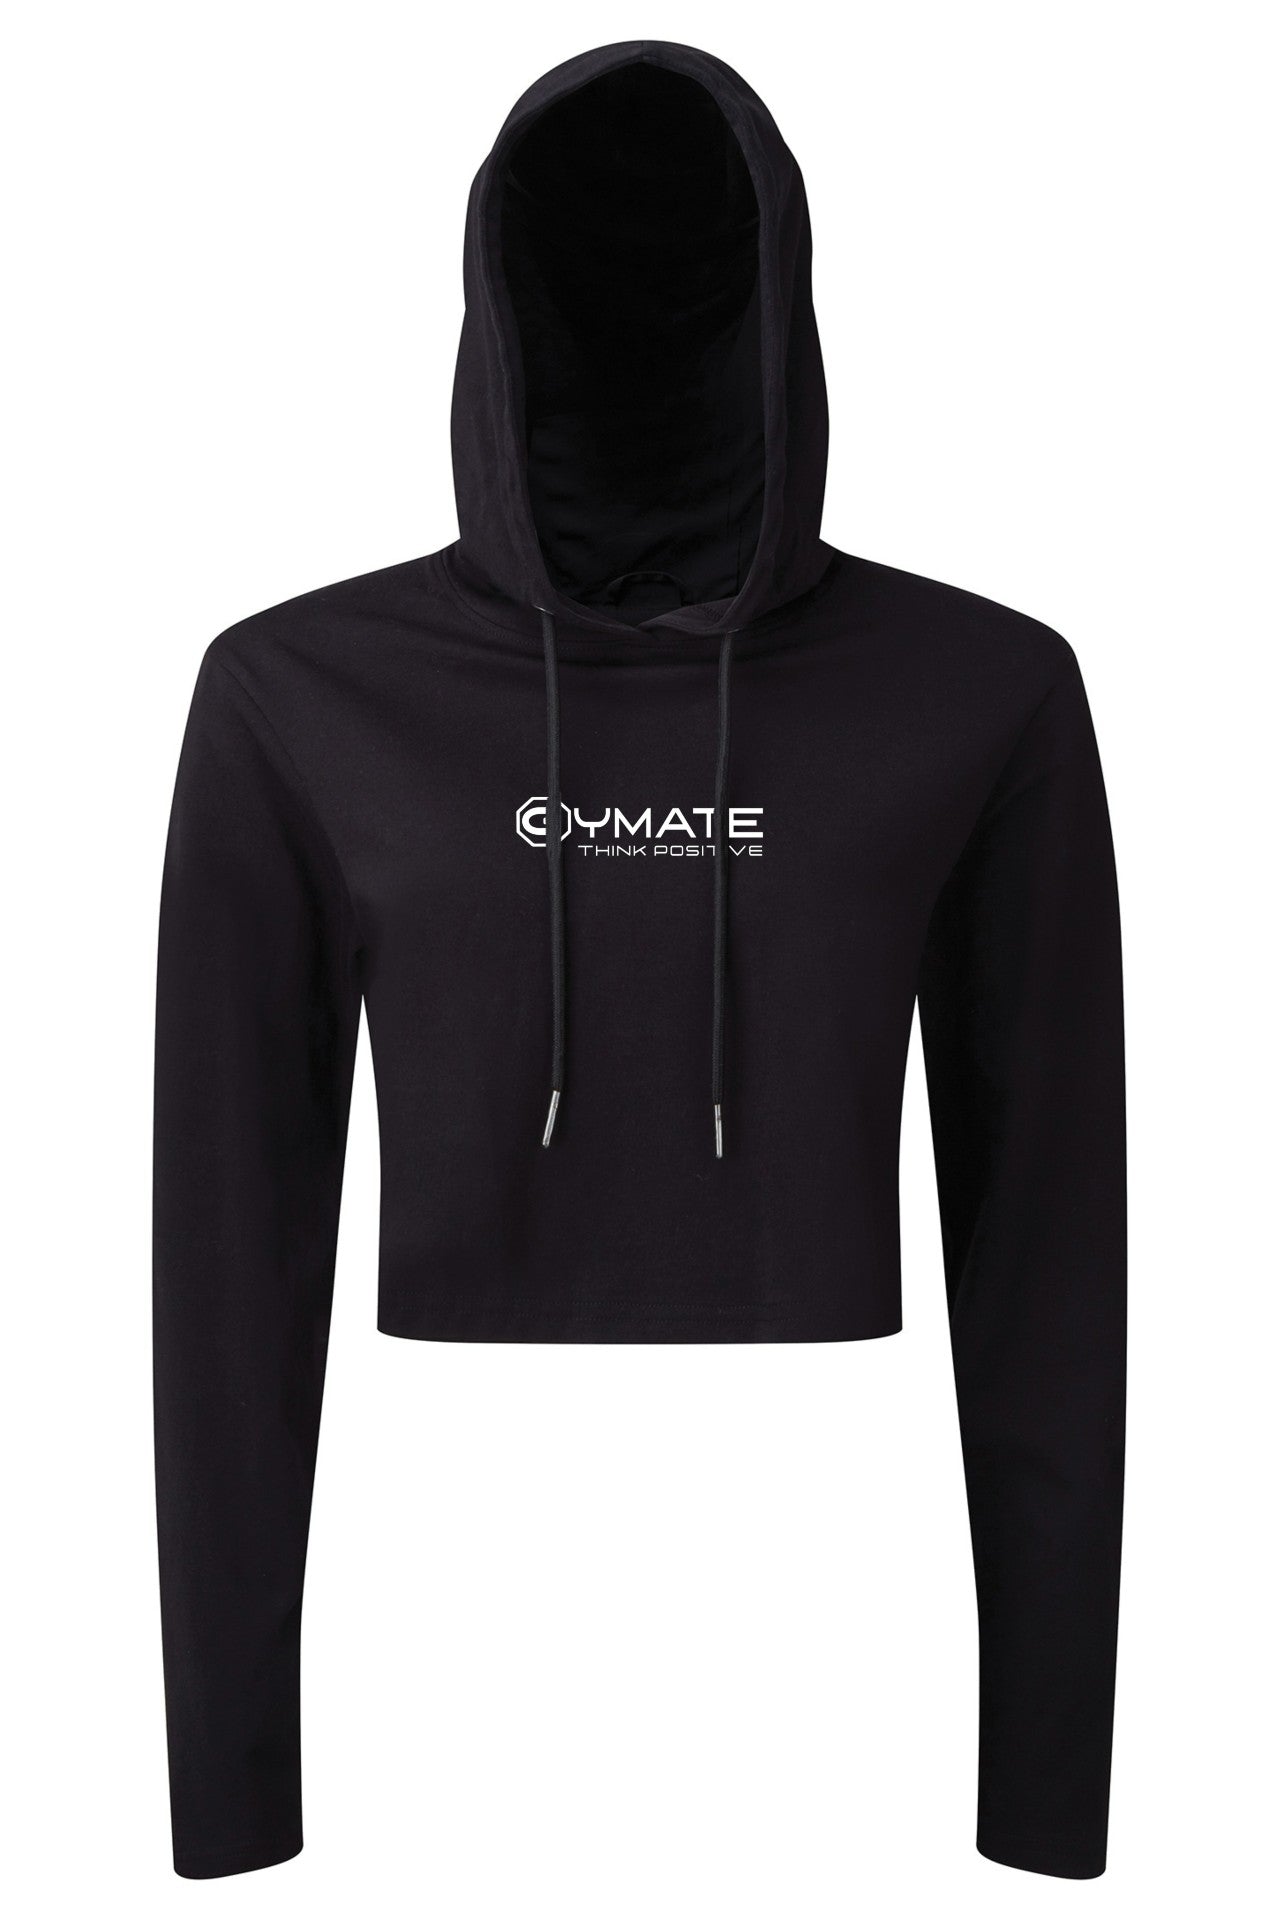 Gymate Pro cropped hooded t shirt black